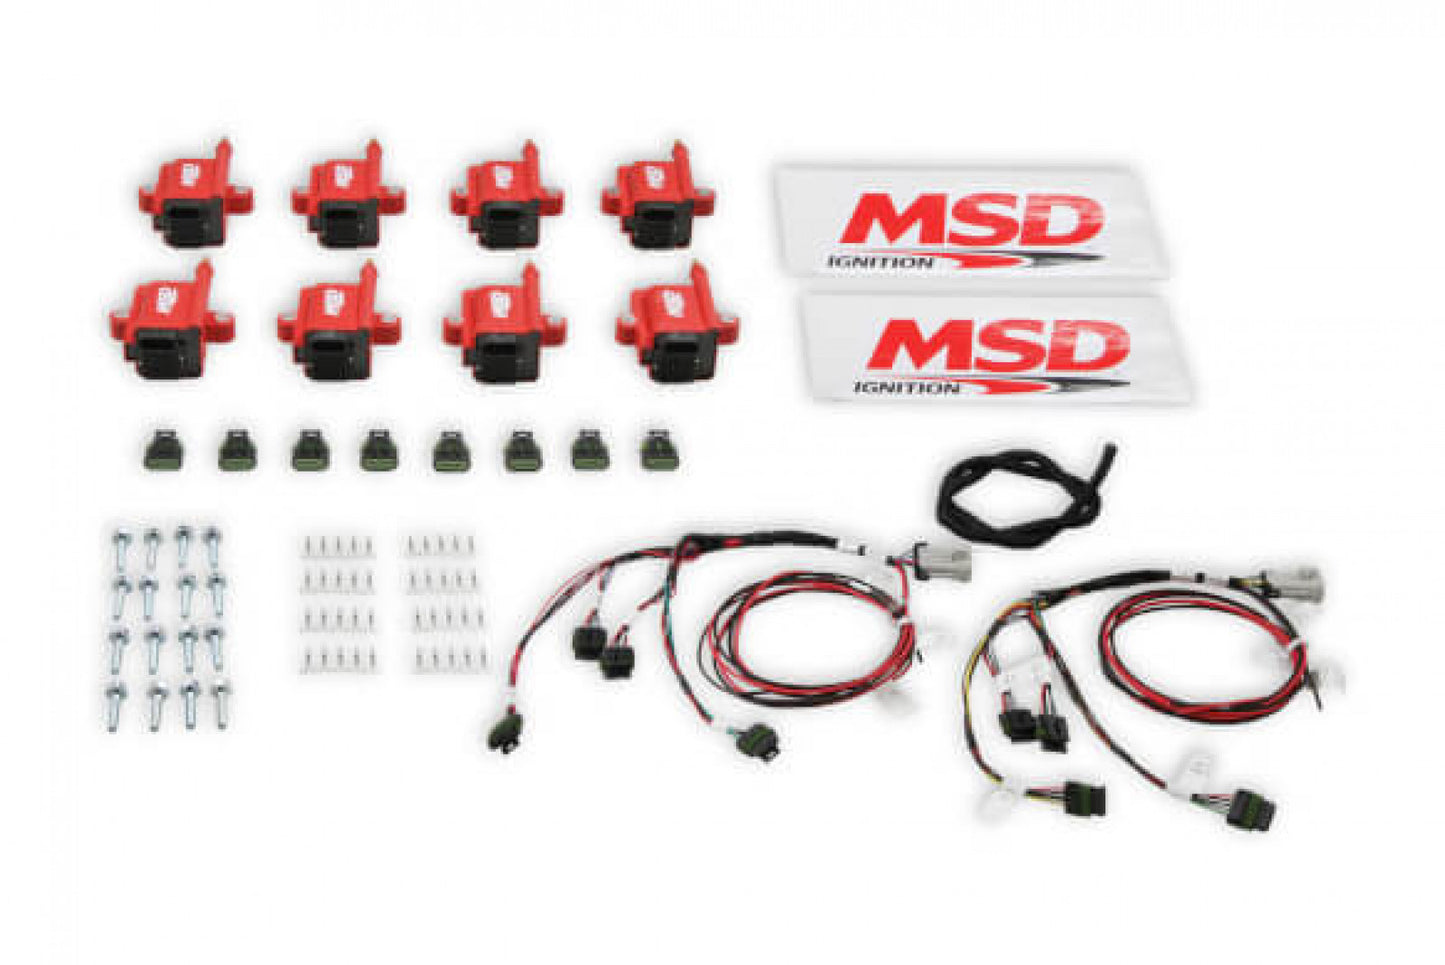 MSD Ignition Coil - Smart - Big Wire Kit - Red 8289-KIT